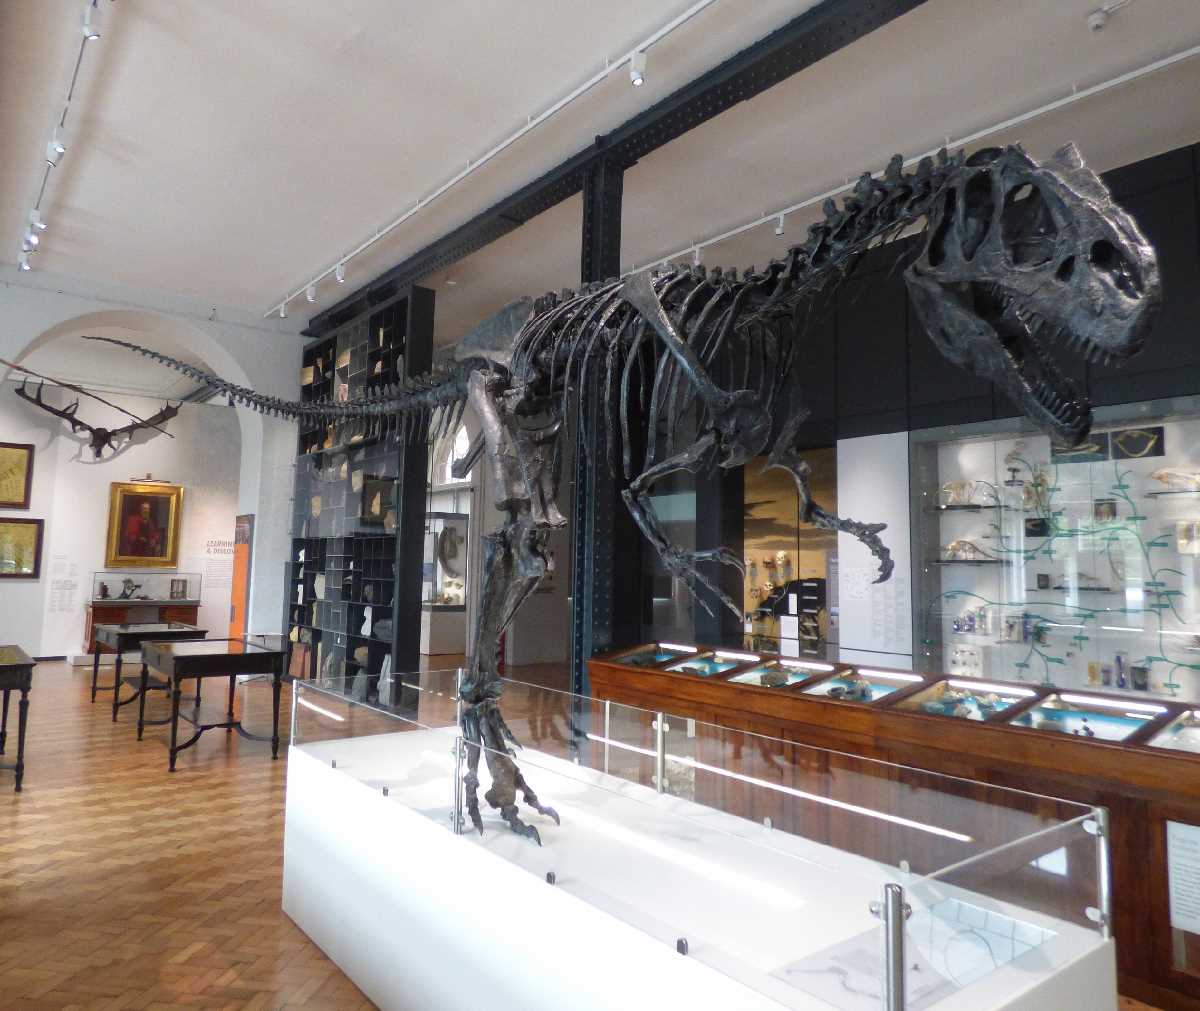 The Lapworth Museum of Geology at the University of Birmingham